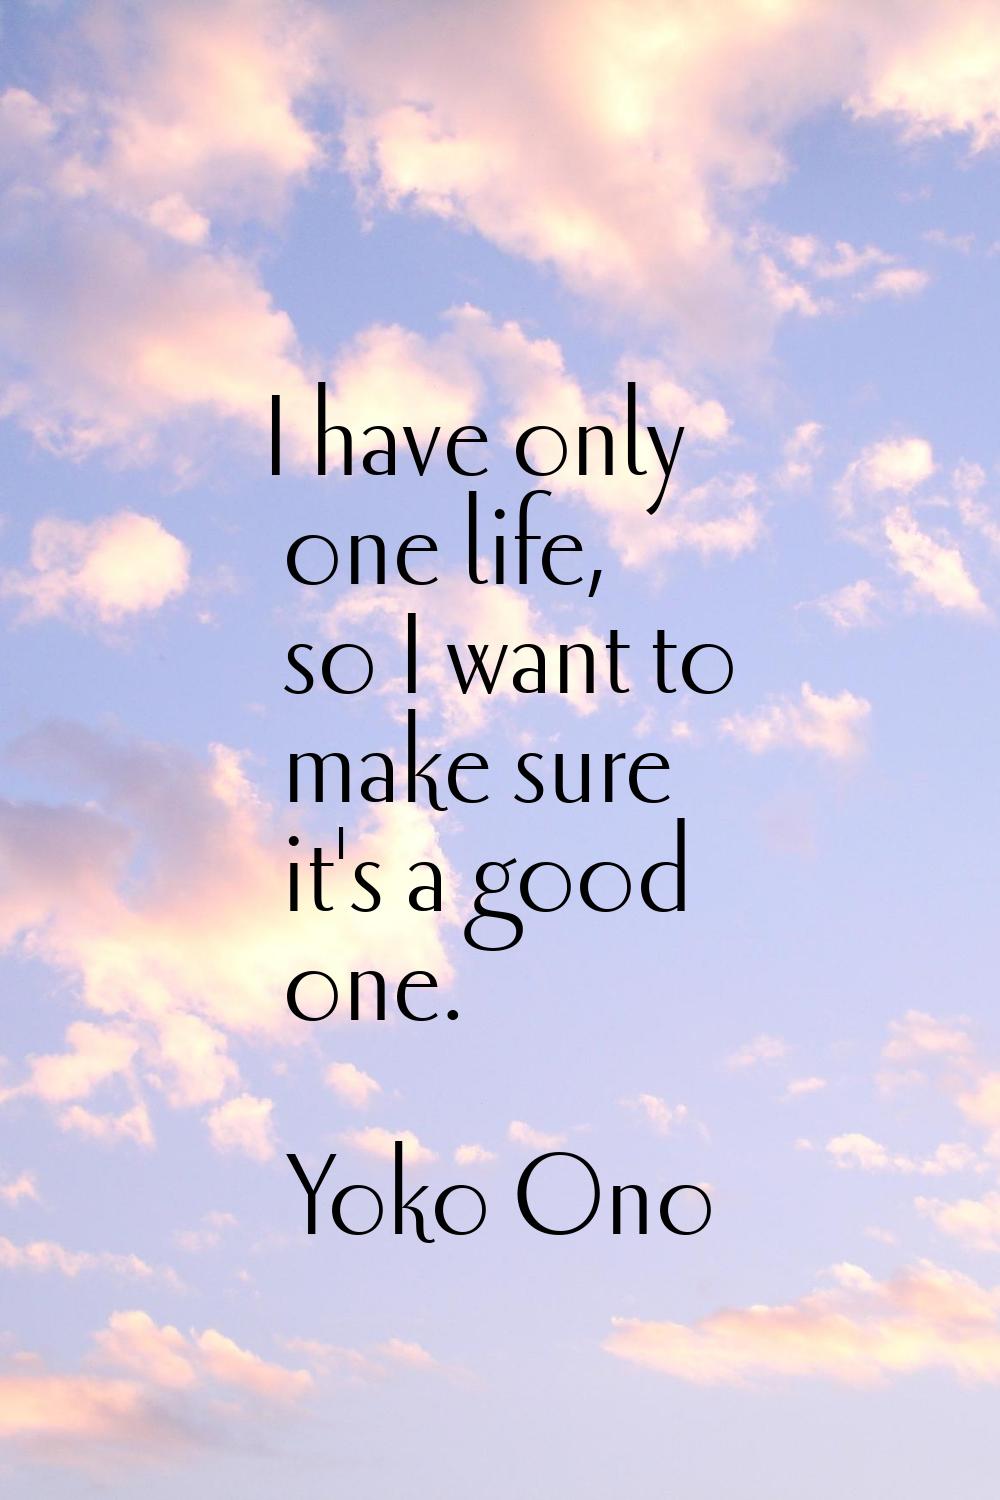 I have only one life, so I want to make sure it's a good one.